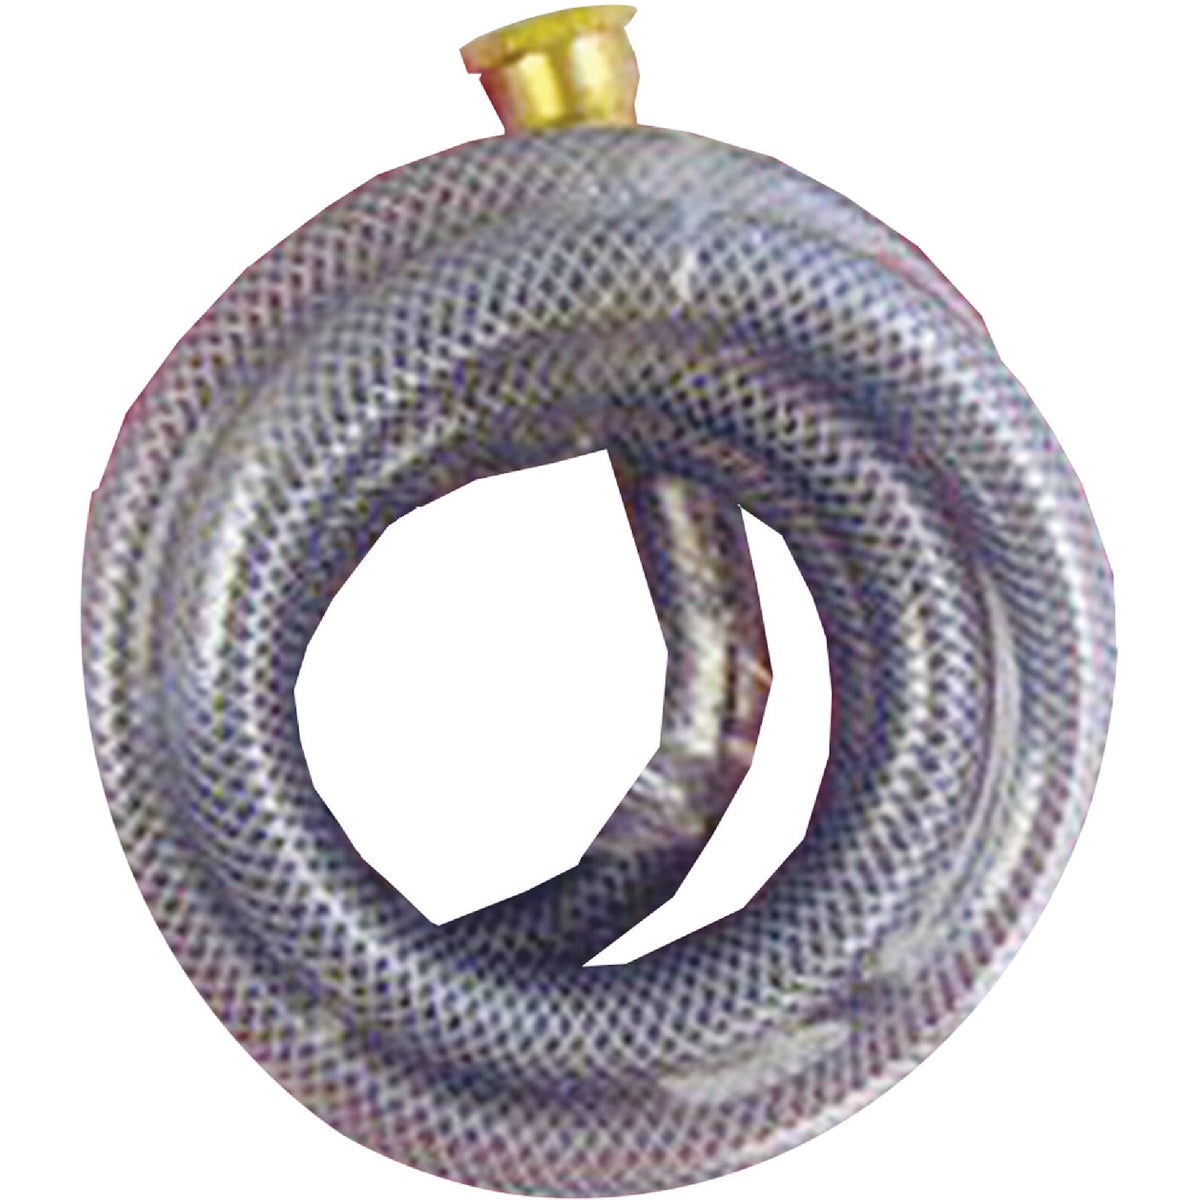 Lasco 48 In. Replacement Sprayer Hose